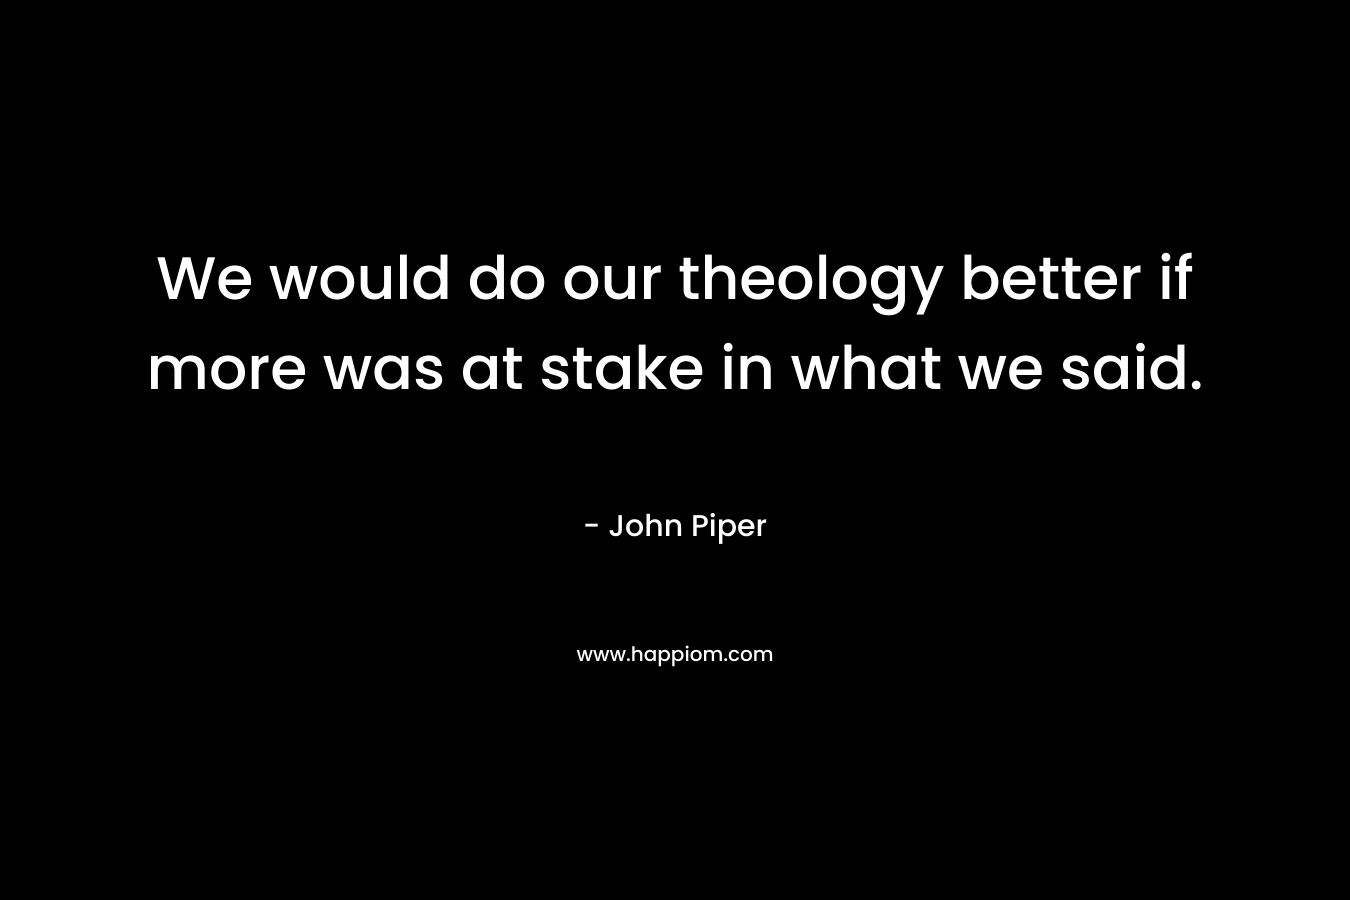 We would do our theology better if more was at stake in what we said. – John Piper